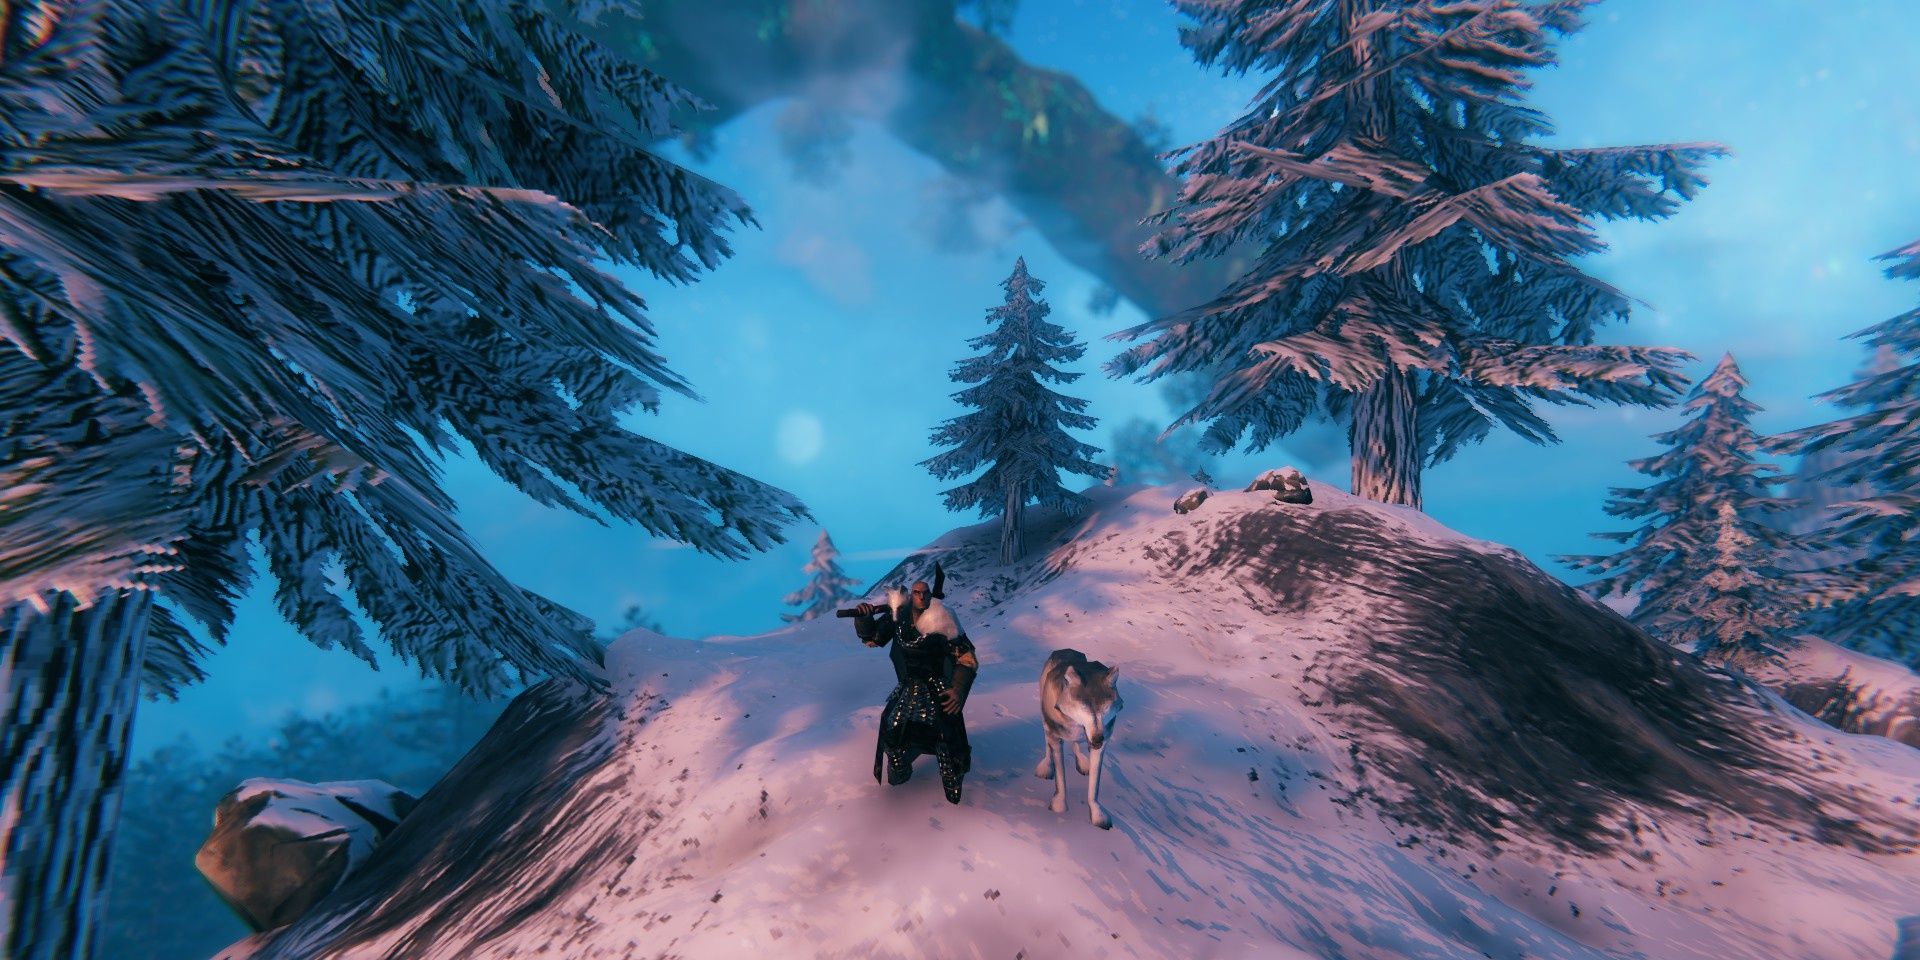 A player stands atop a peak in the Mountains with a Tamed Wolf at their side.